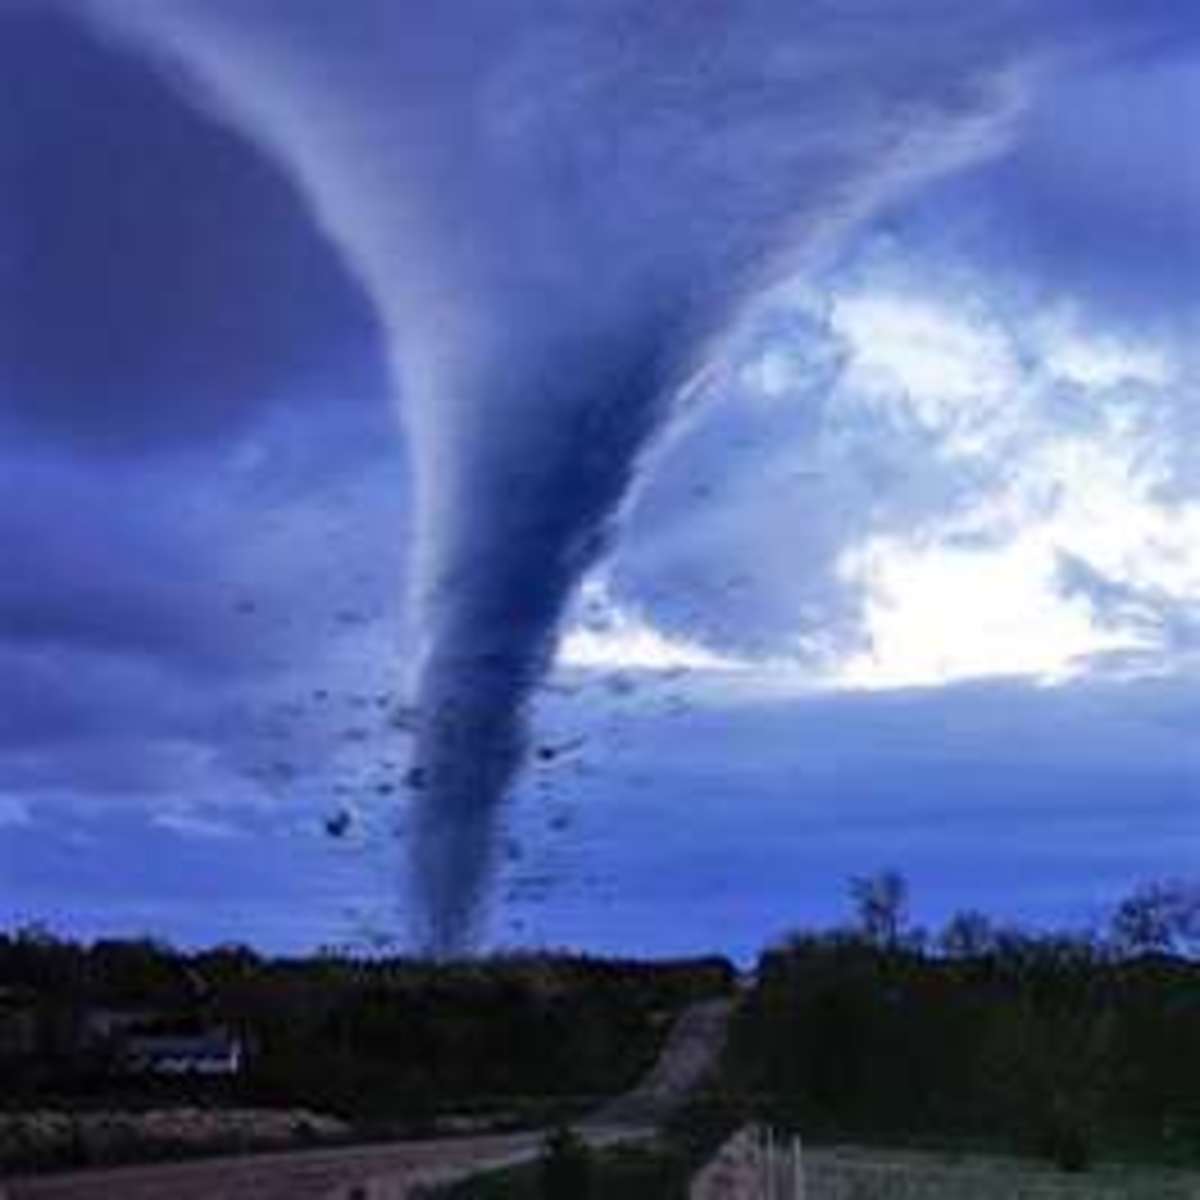 The Five Most Destructive Tornadoes in U.S. History